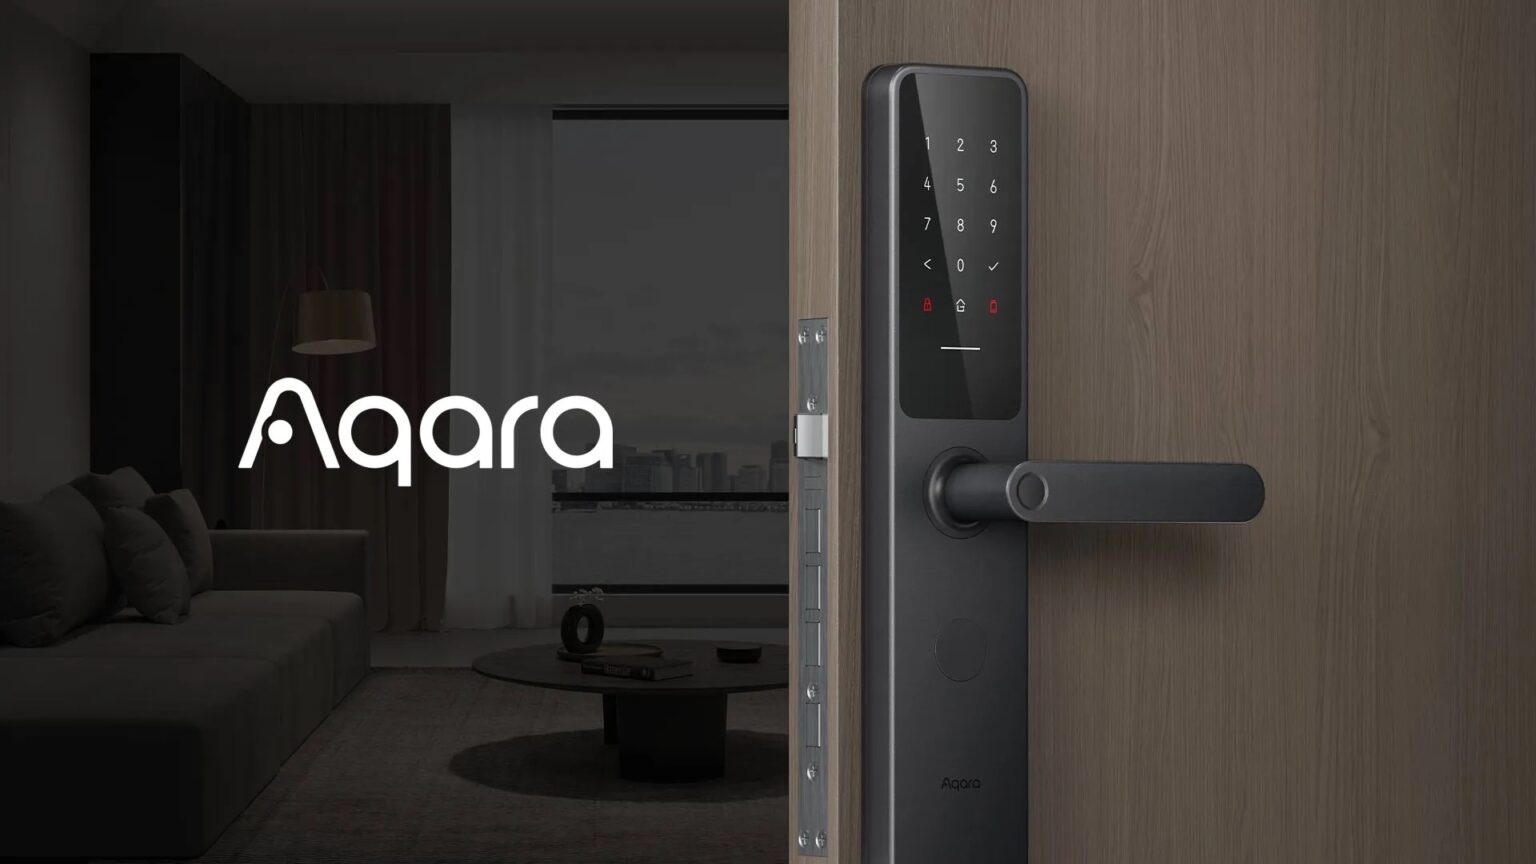 With its support for Apple's HomeKit and Home Key, we hope the new Aqara Smart Door Lock A100 Zigbee comes to the US soon.